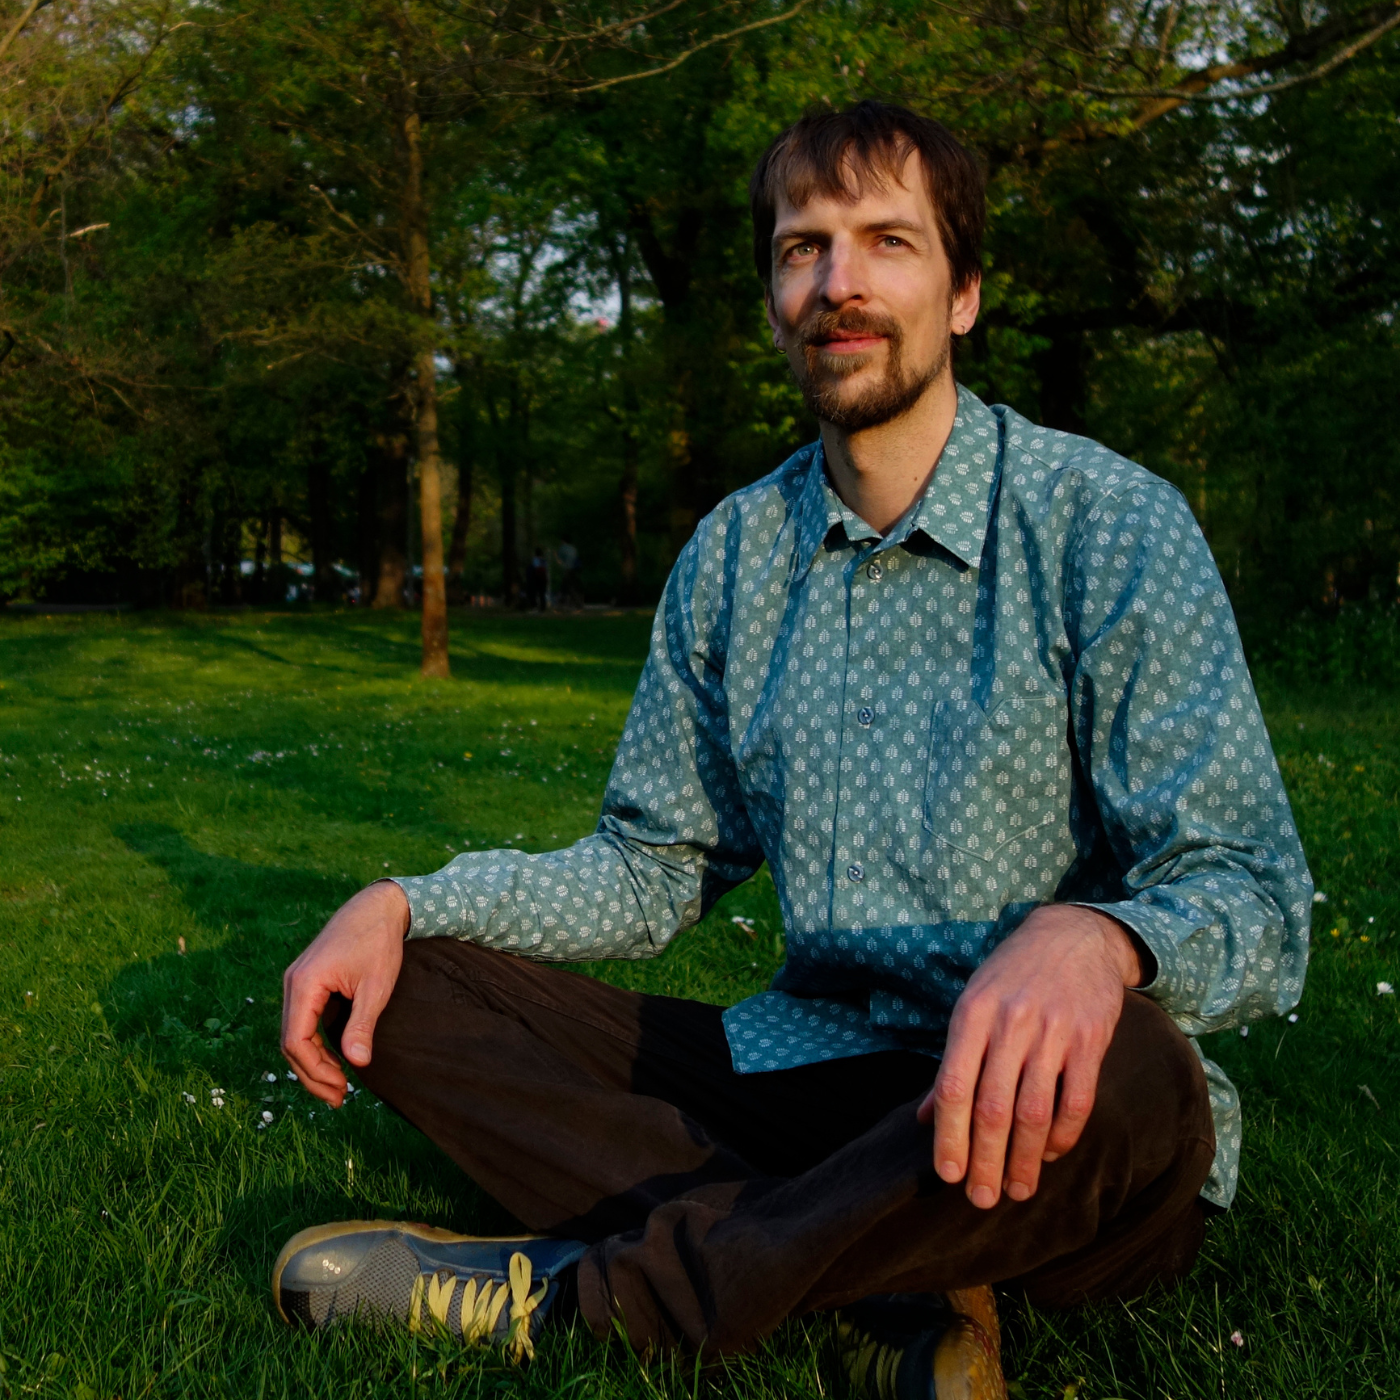 Kevin sits cross legged in a grassy park with his hands on his knees. He is wearing a teal button-up shirt and black pants and looking up and to the left. The shirt has repeating rows of small white block print ferns. There are tall trees behind him.